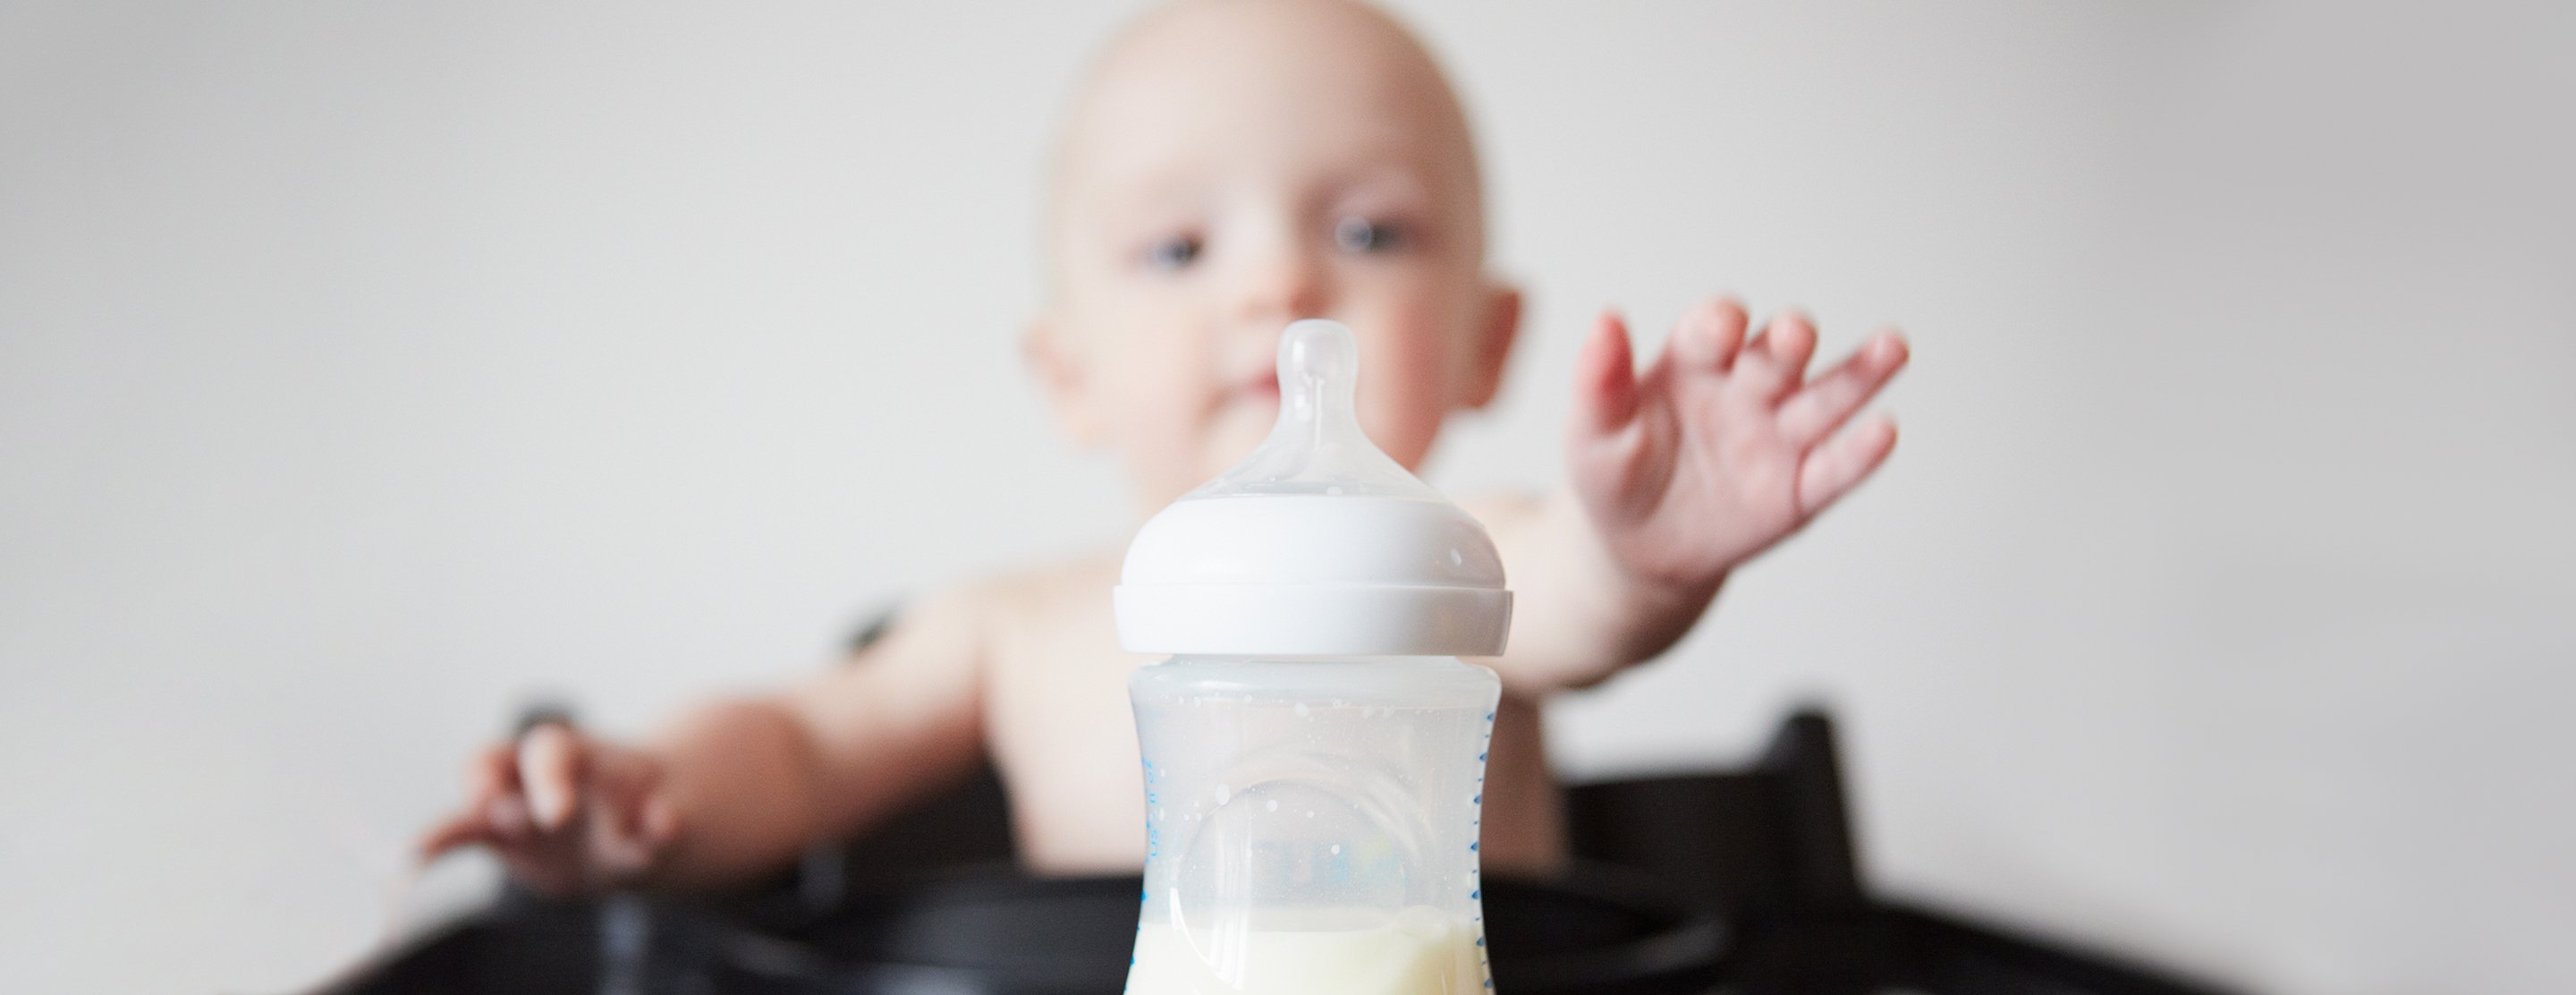 https://www.ucsfbenioffchildrens.org/-/media/project/ucsf/ucsf-bch/images/education/hero/faq-baby-bottle-weaning-2x.jpg